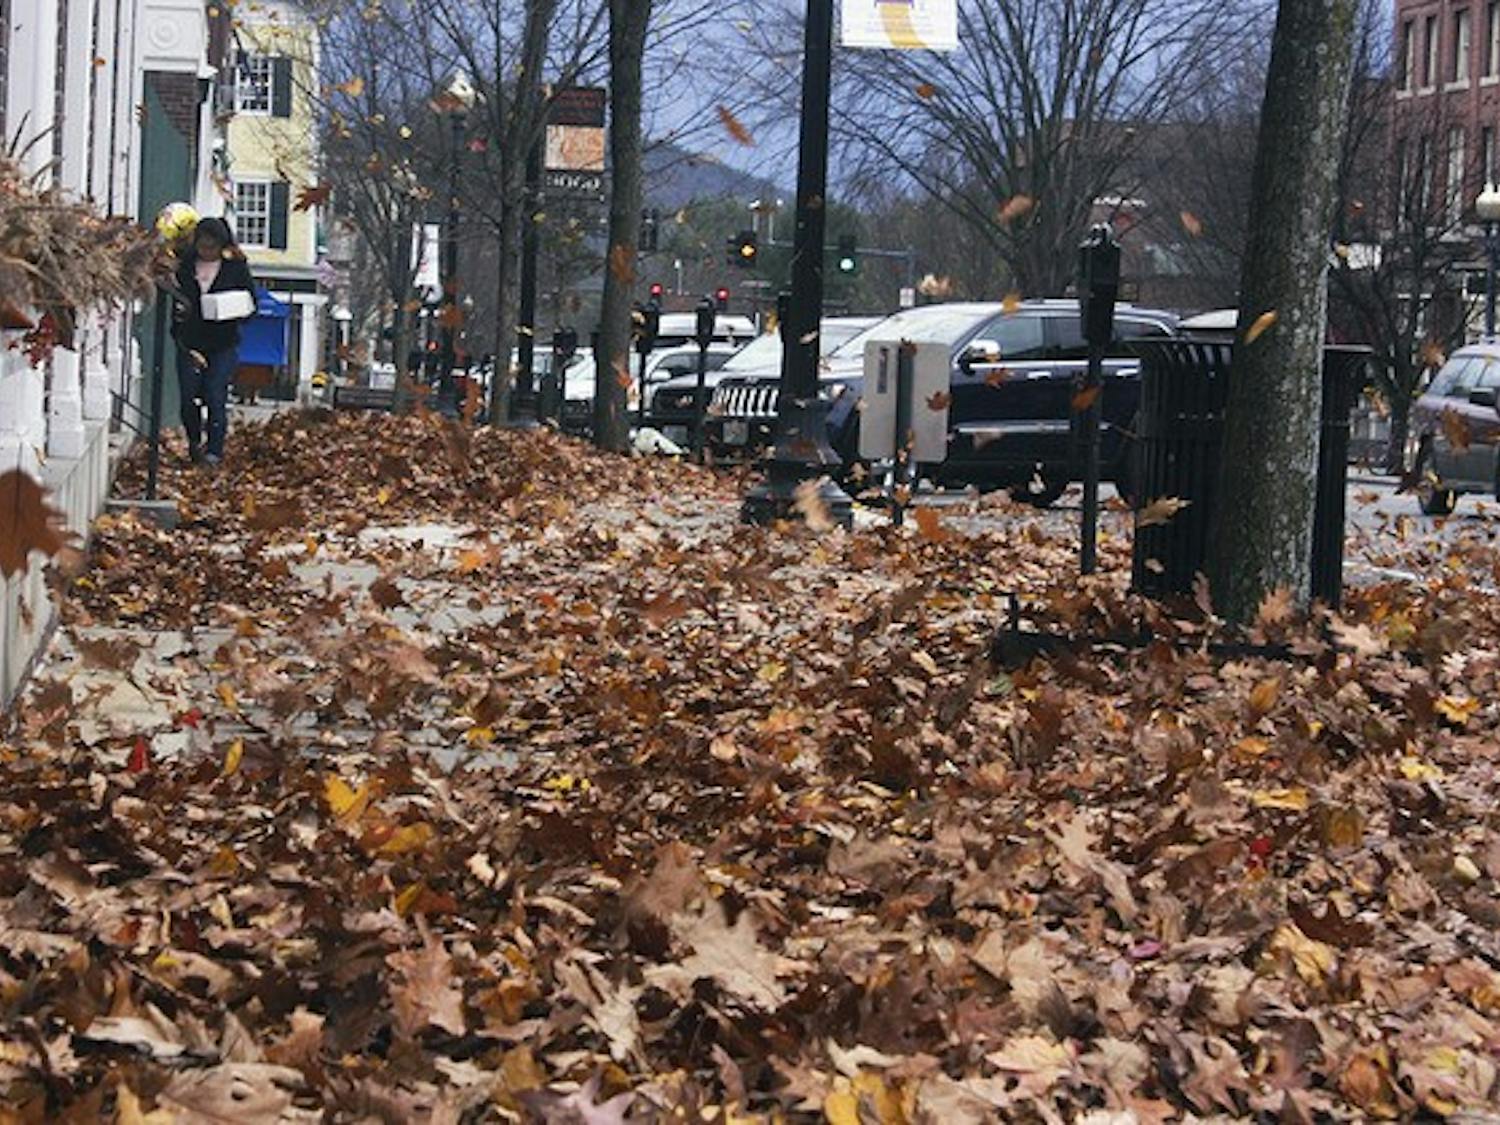 The greater Dartmouth community prepared for Hurricane Sandy on Tuesday afternoon.